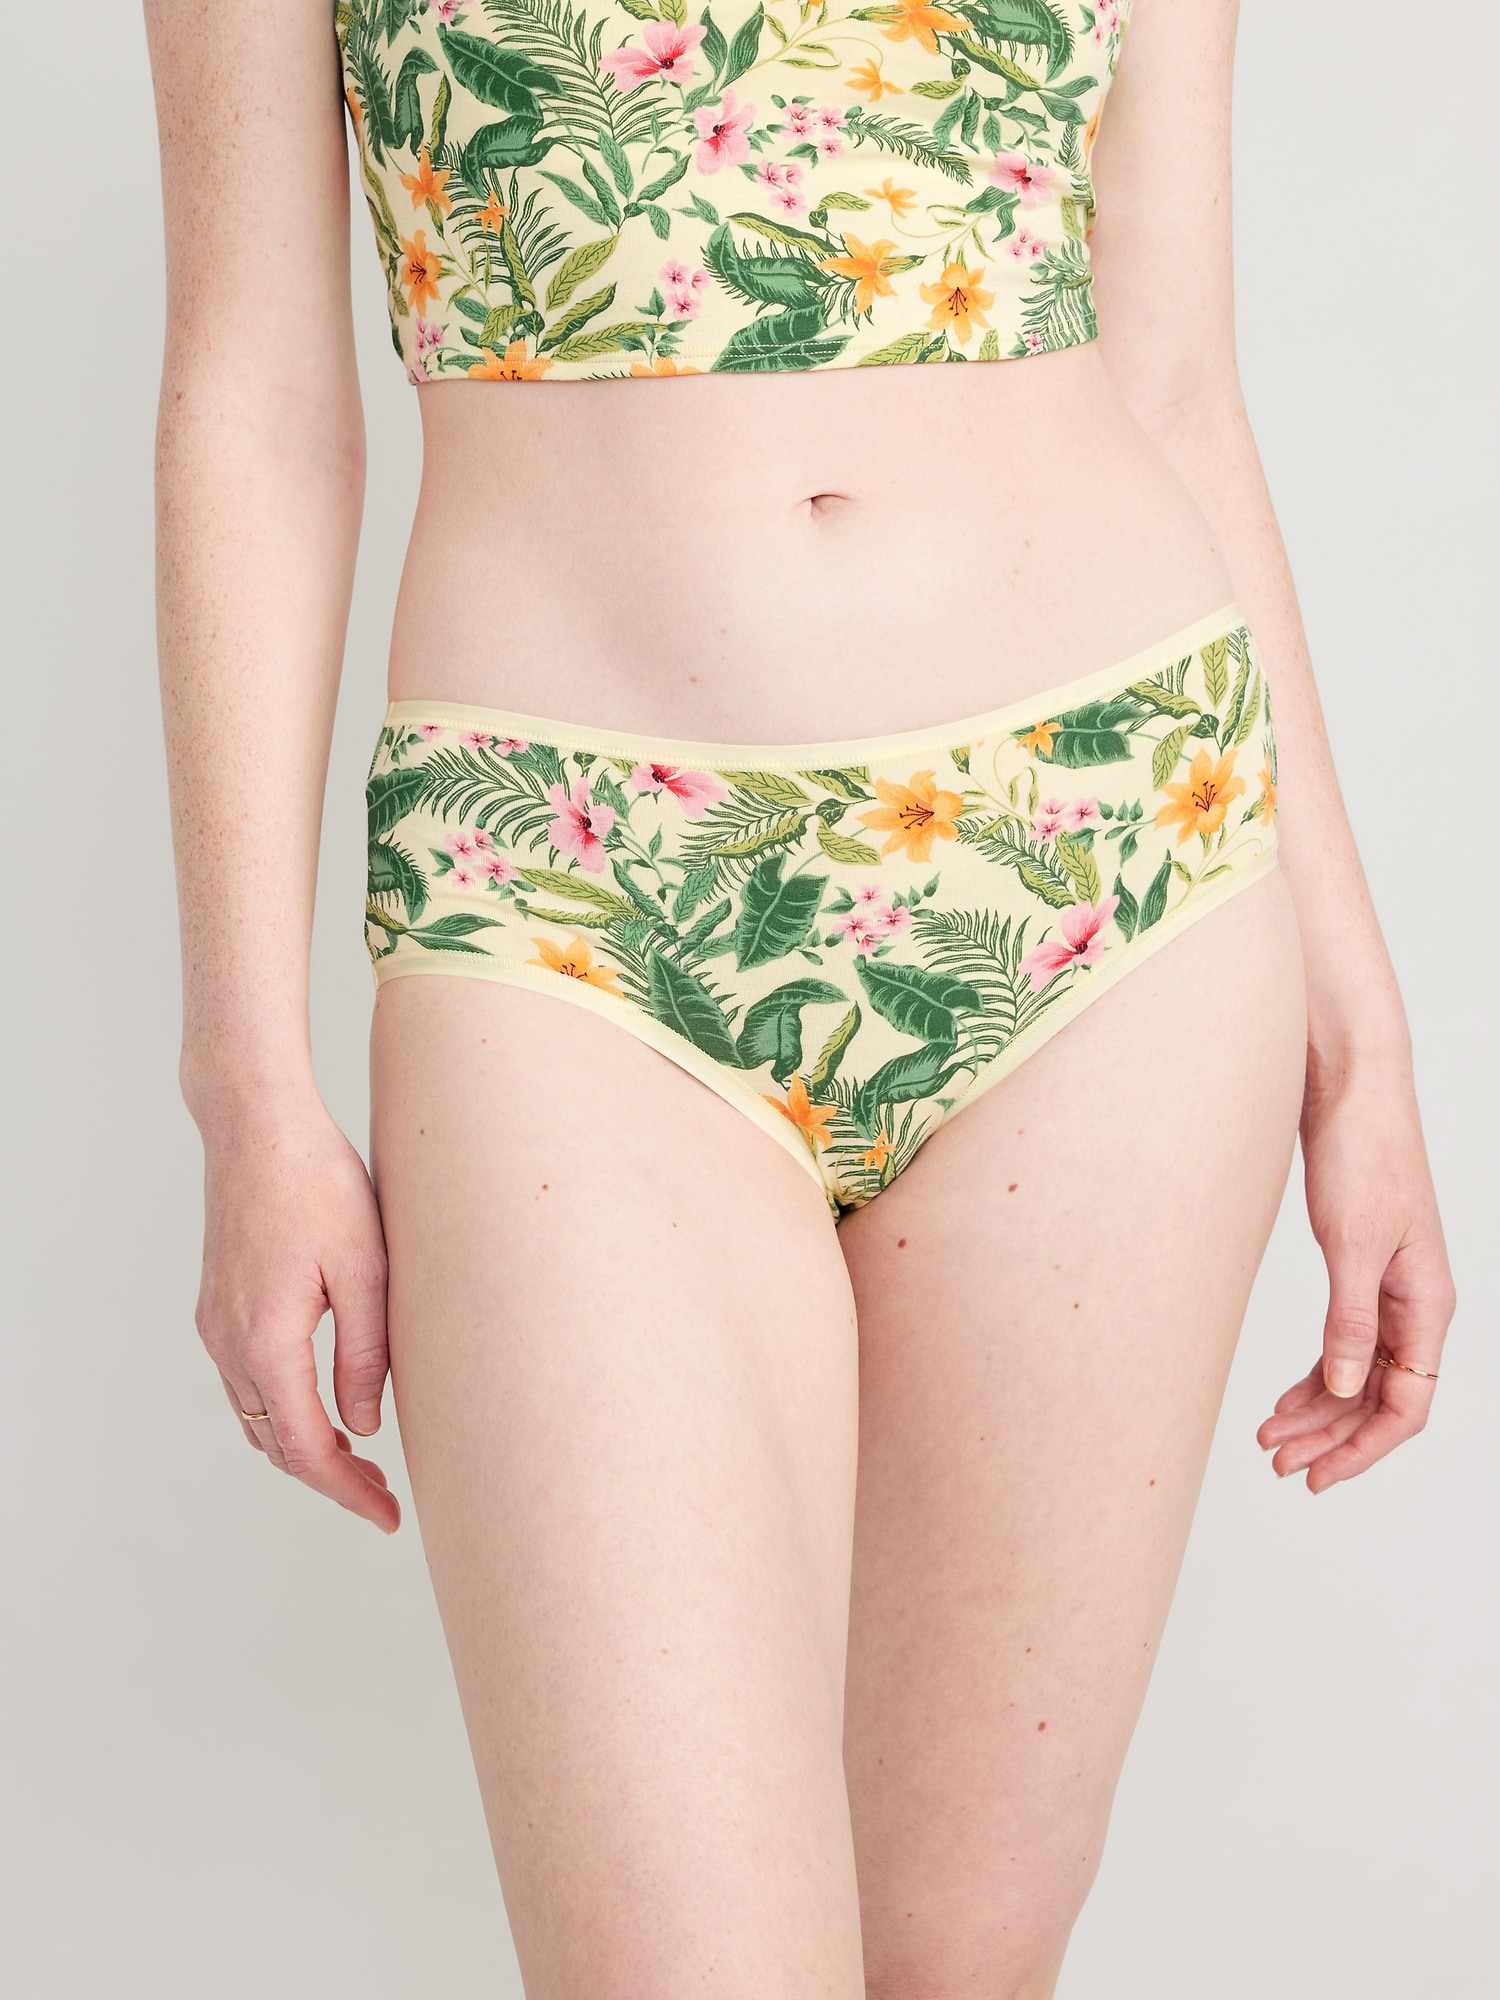 Buy Mid Waist Fruit Print Hipster Panty in Yellow - Cotton Online